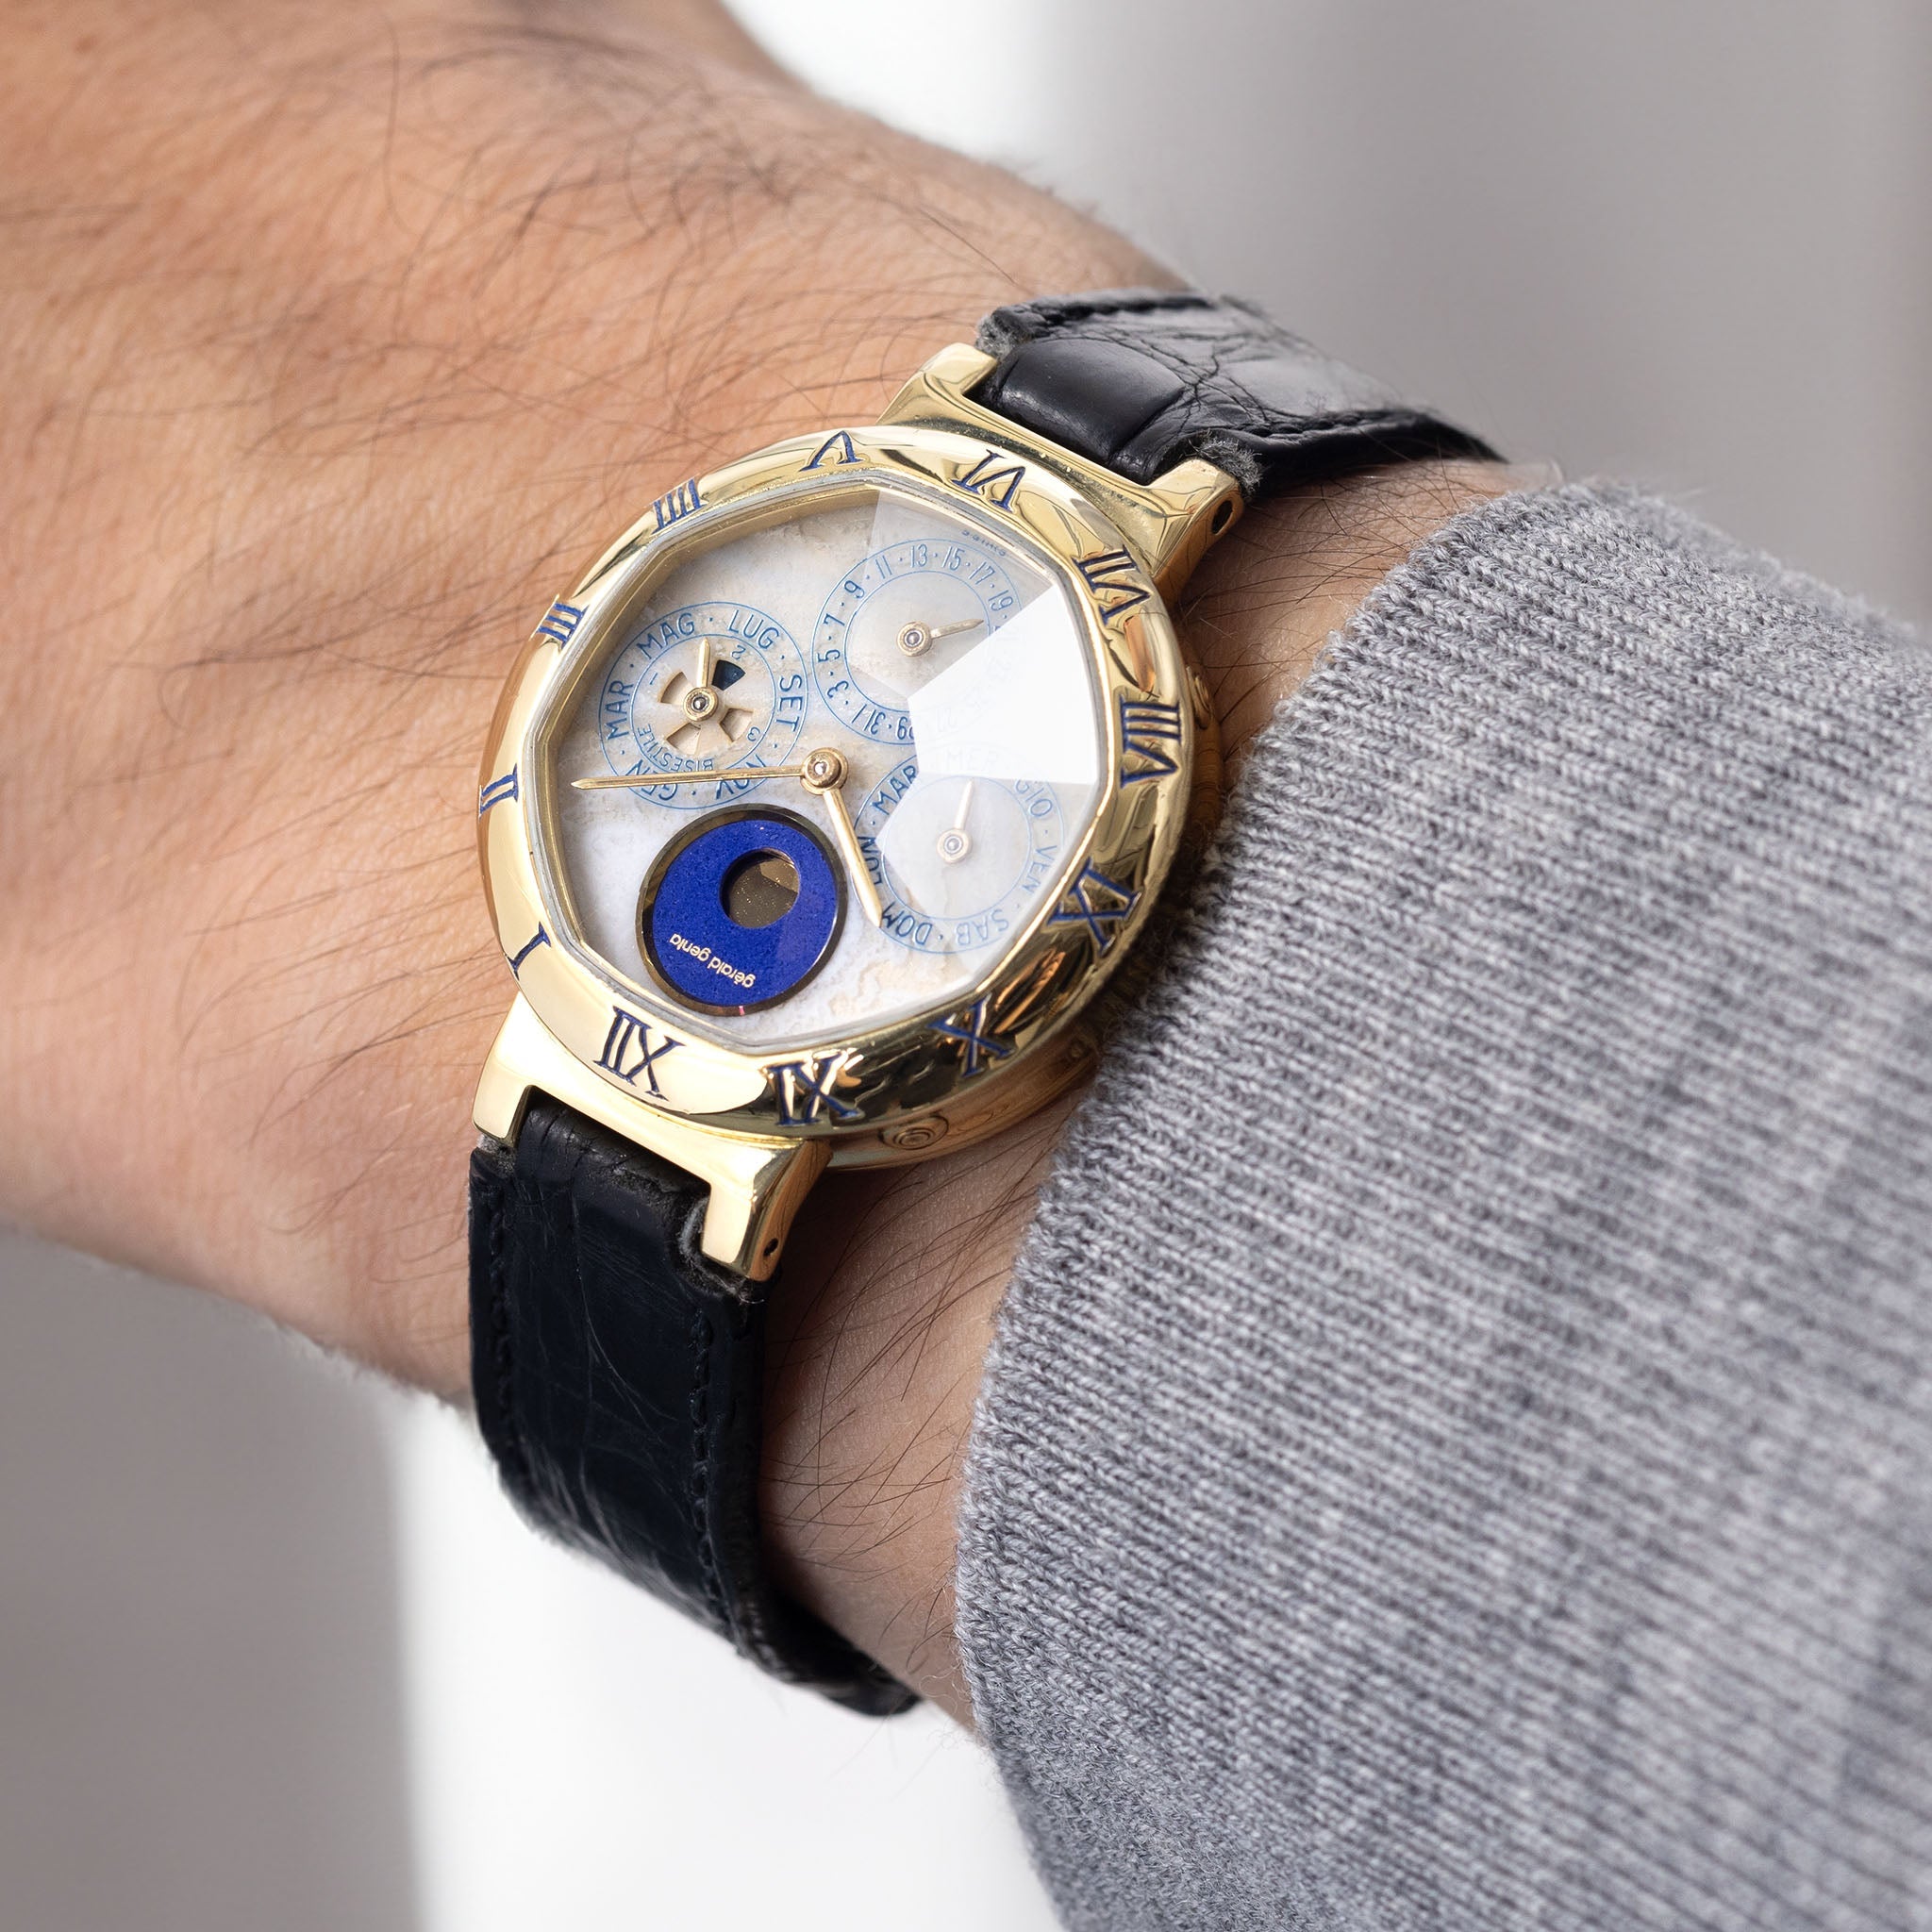 Gerald Genta "Success" Perpetual Calendar Moonphase 18kt Yellow Gold Ref G2994.7 - incoming